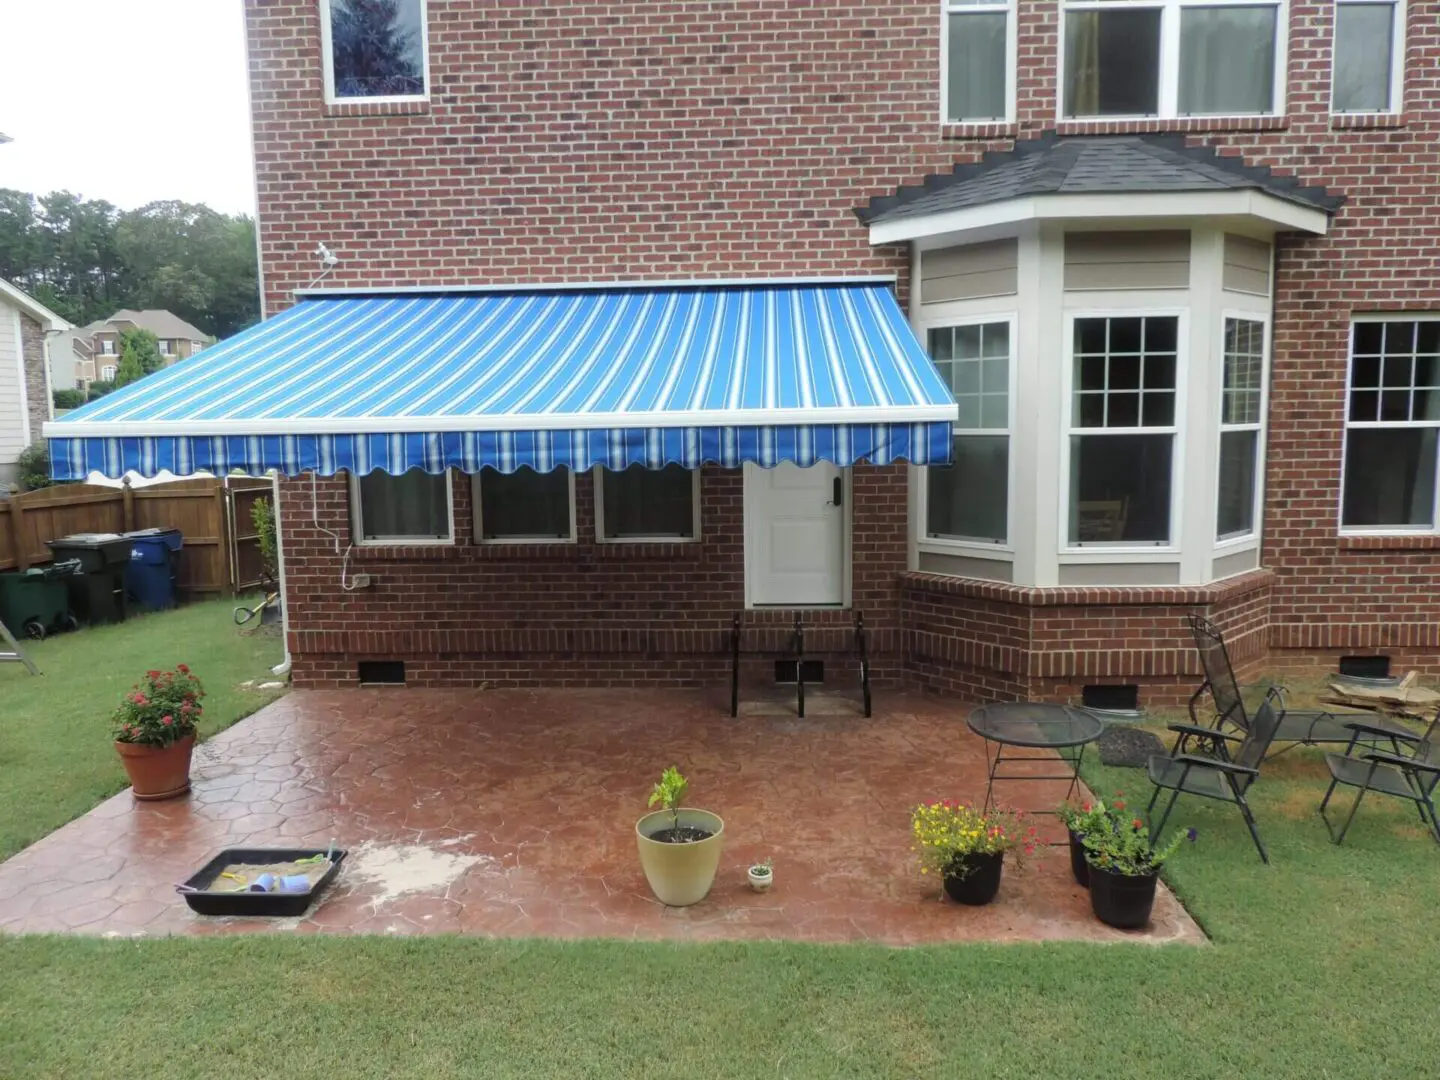 Motorized Retractable awnings in the backyard